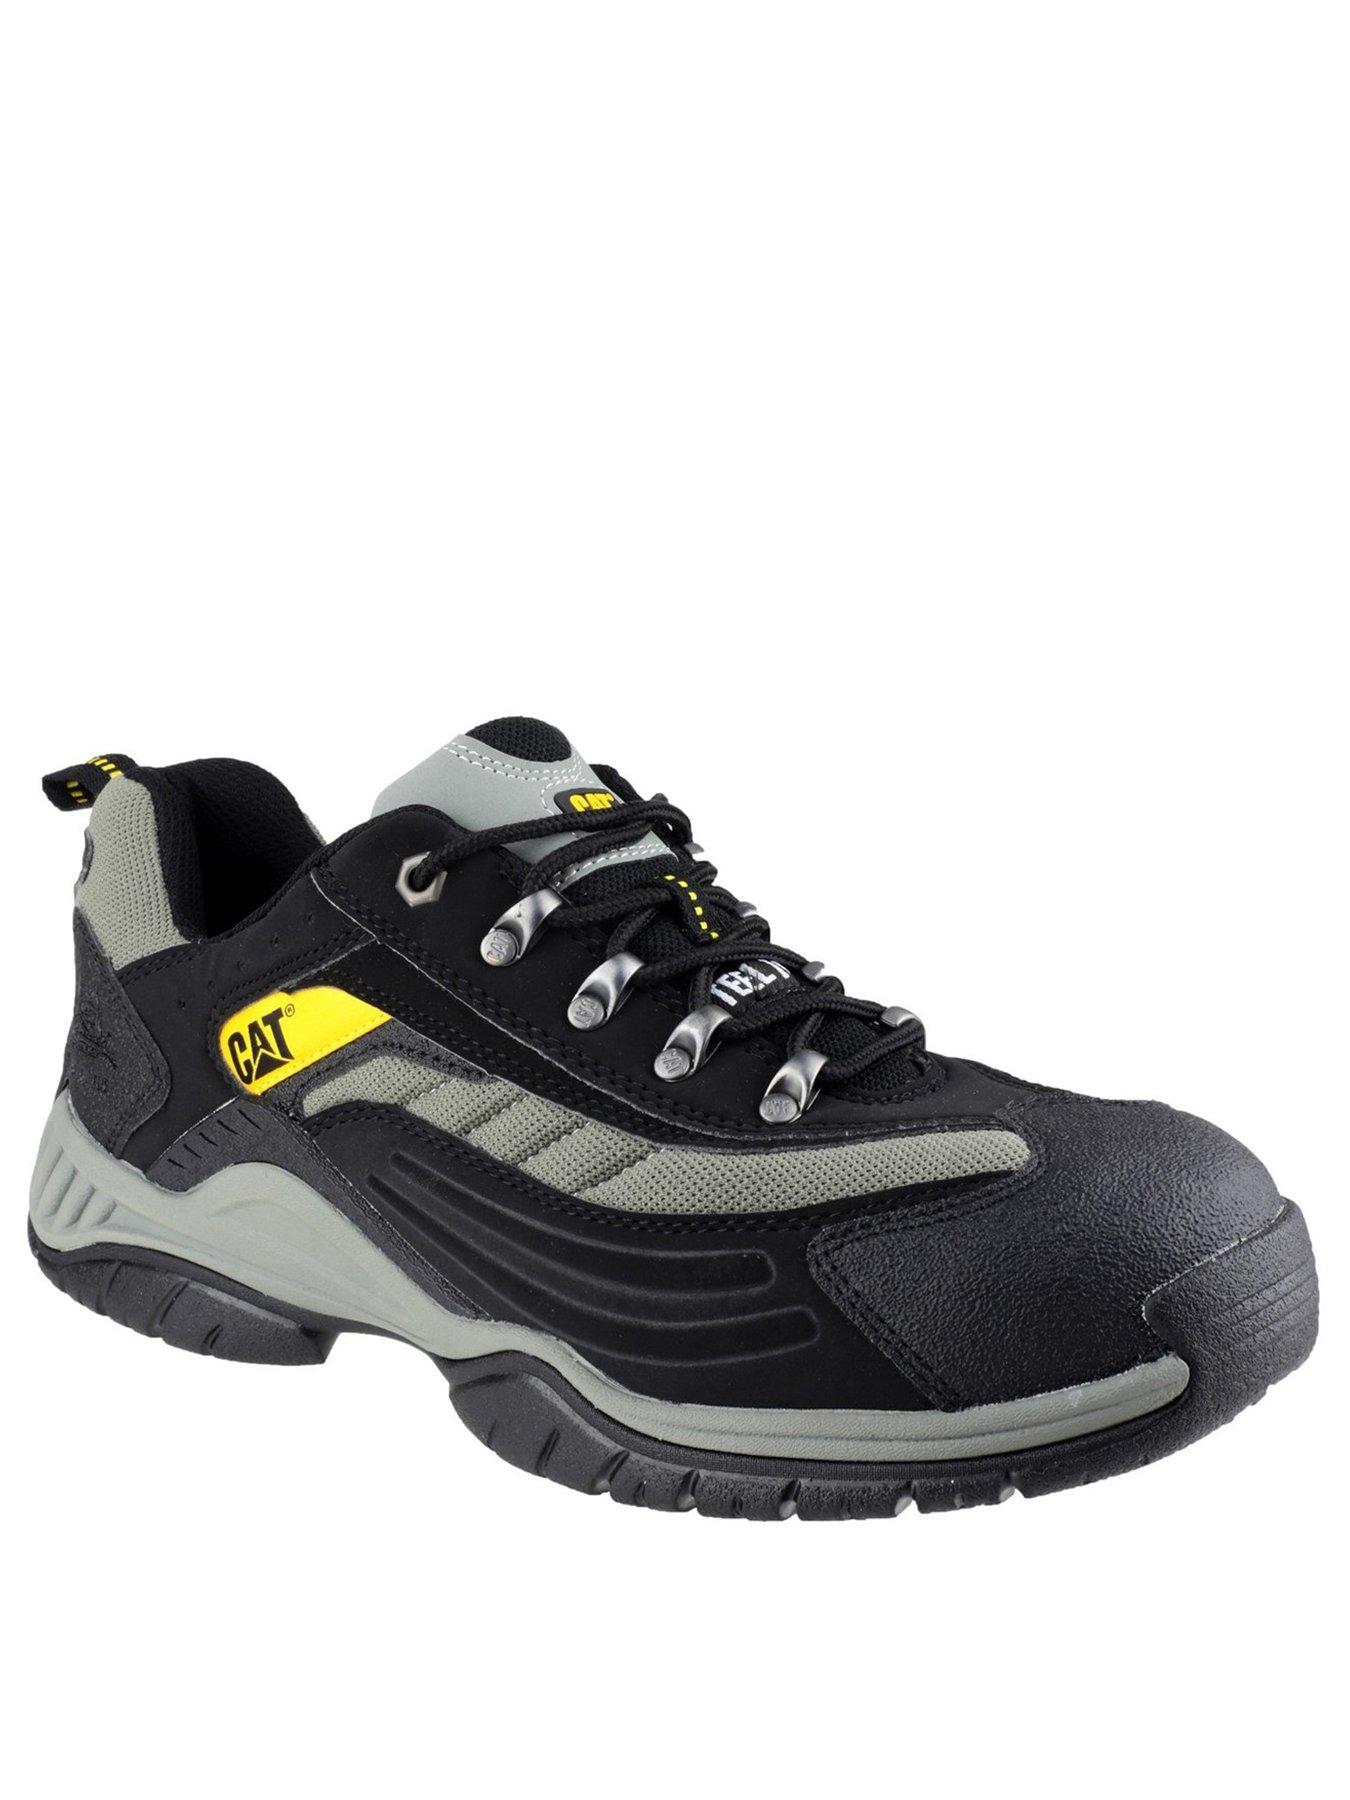 safety trainers shoe zone